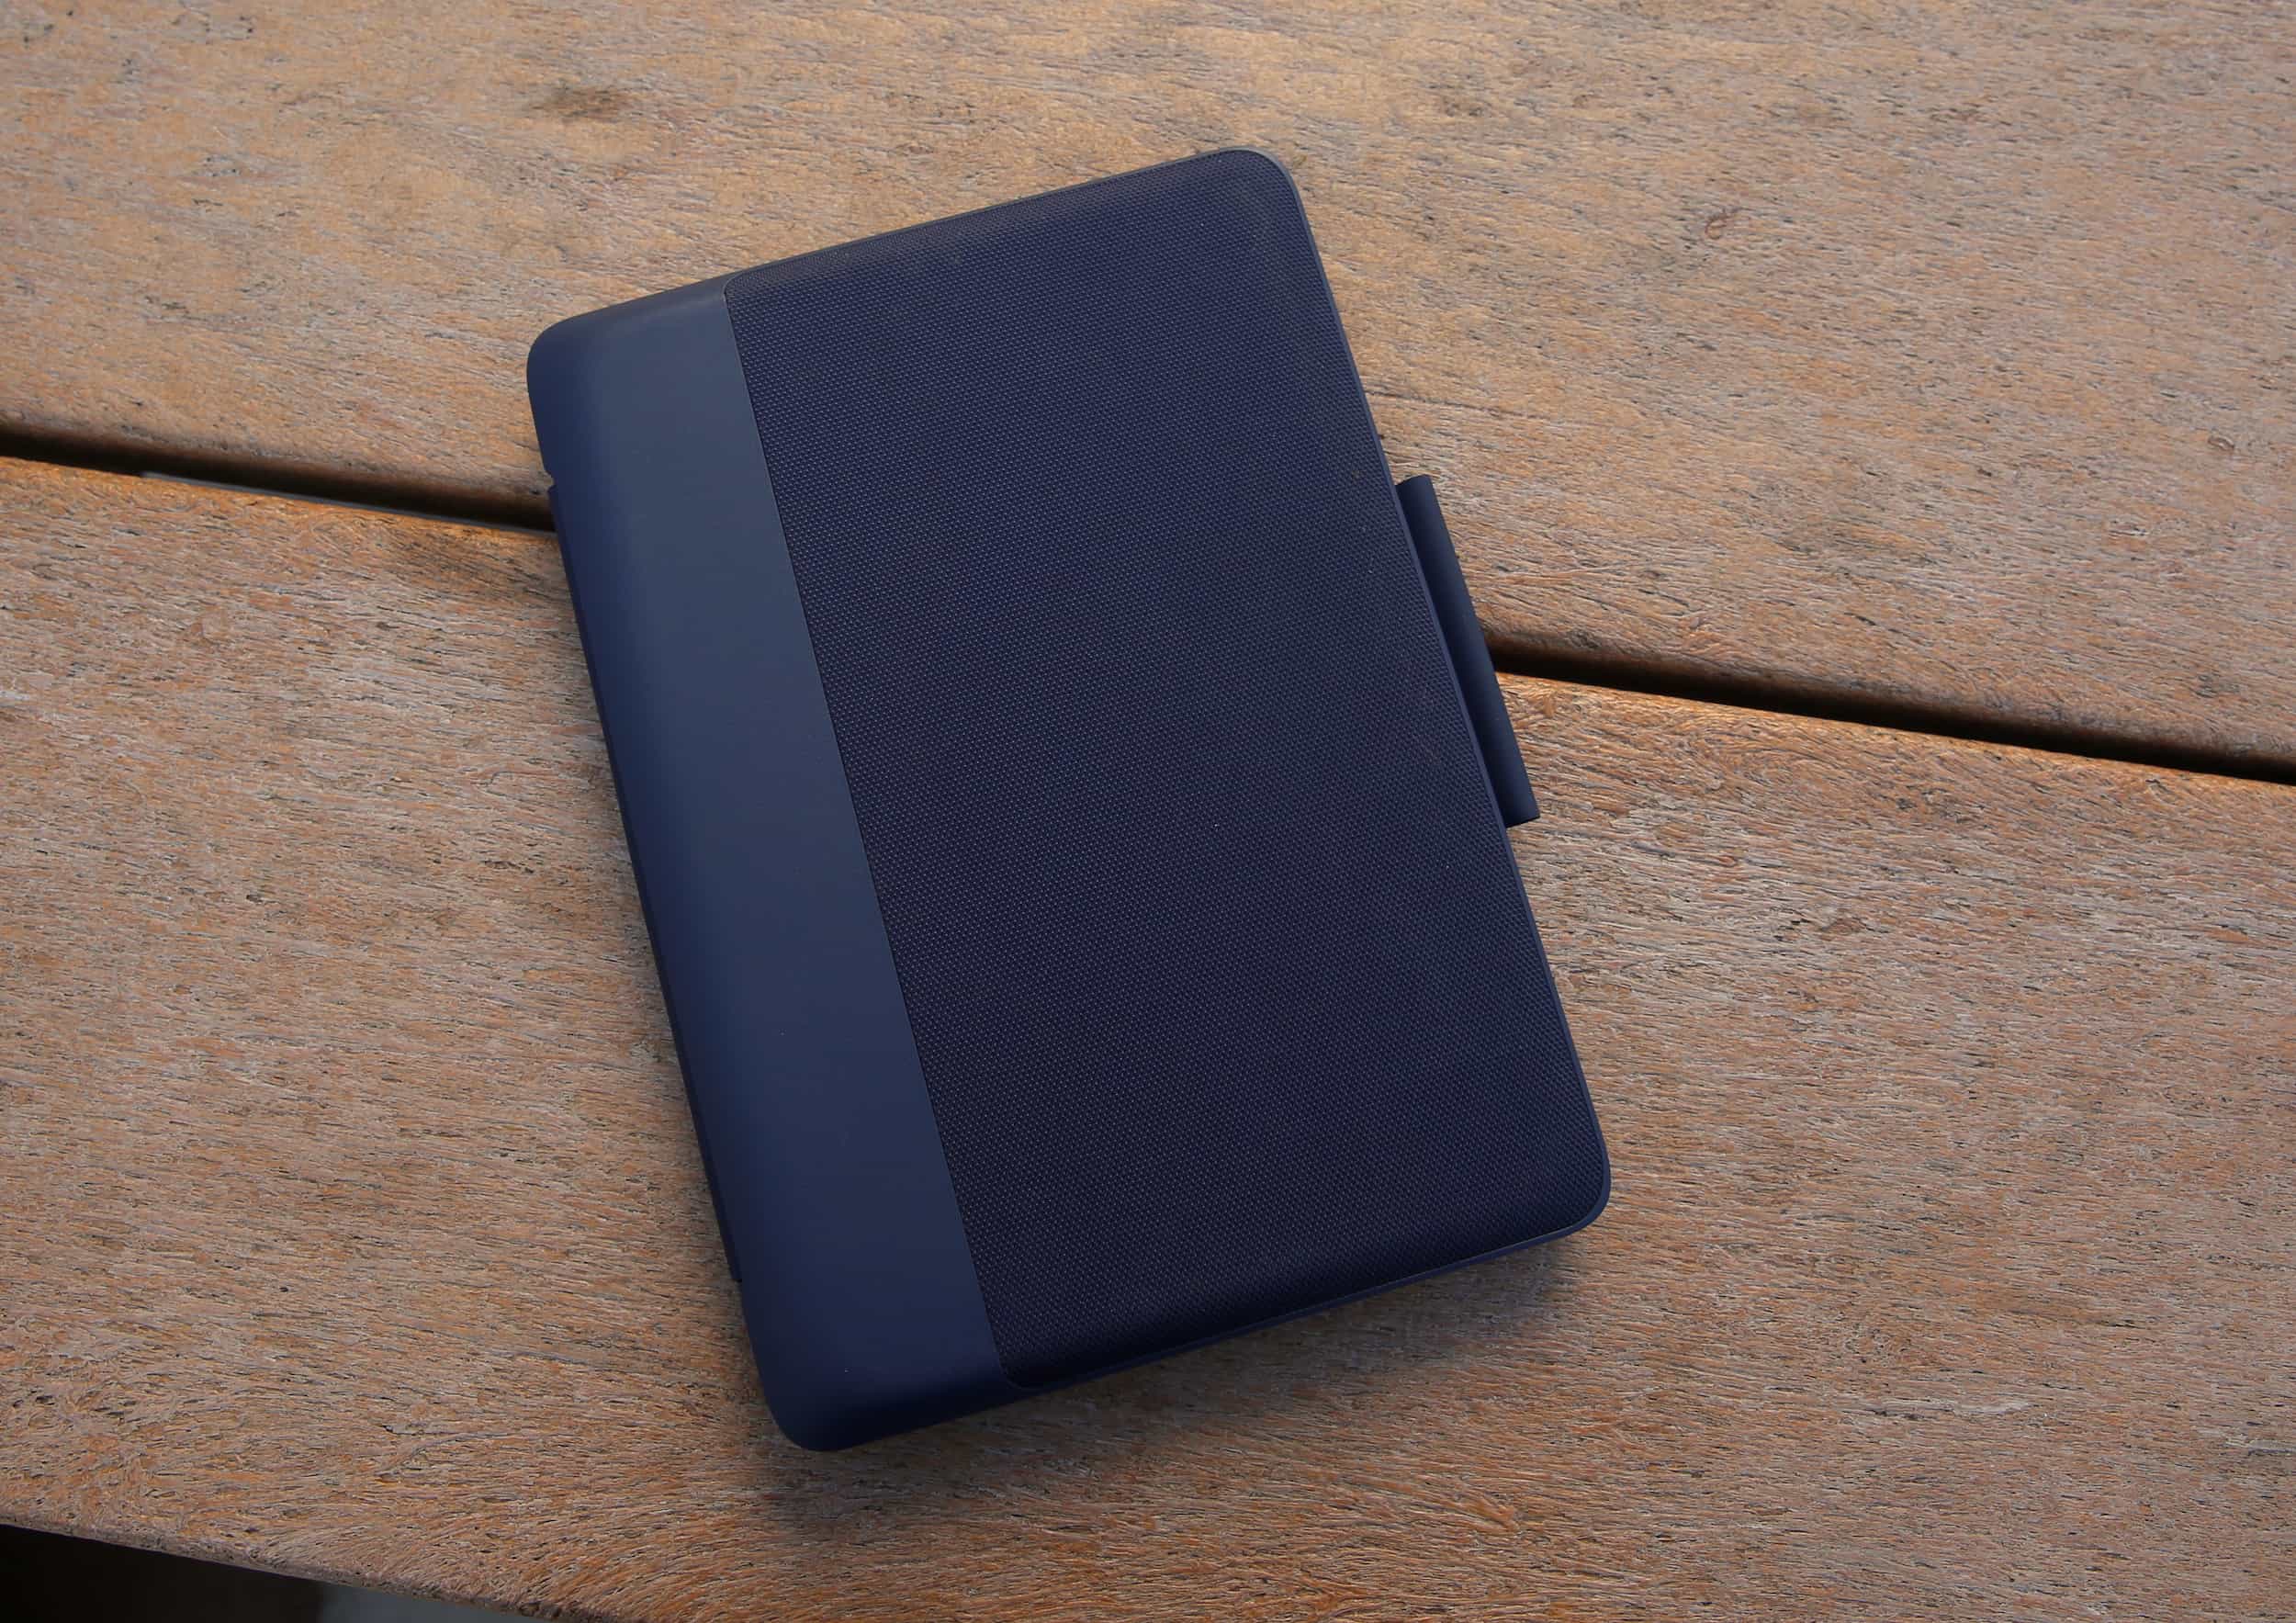 Logitech Slim review: Rugged case gives iPad Pro super-comfortable keyboard